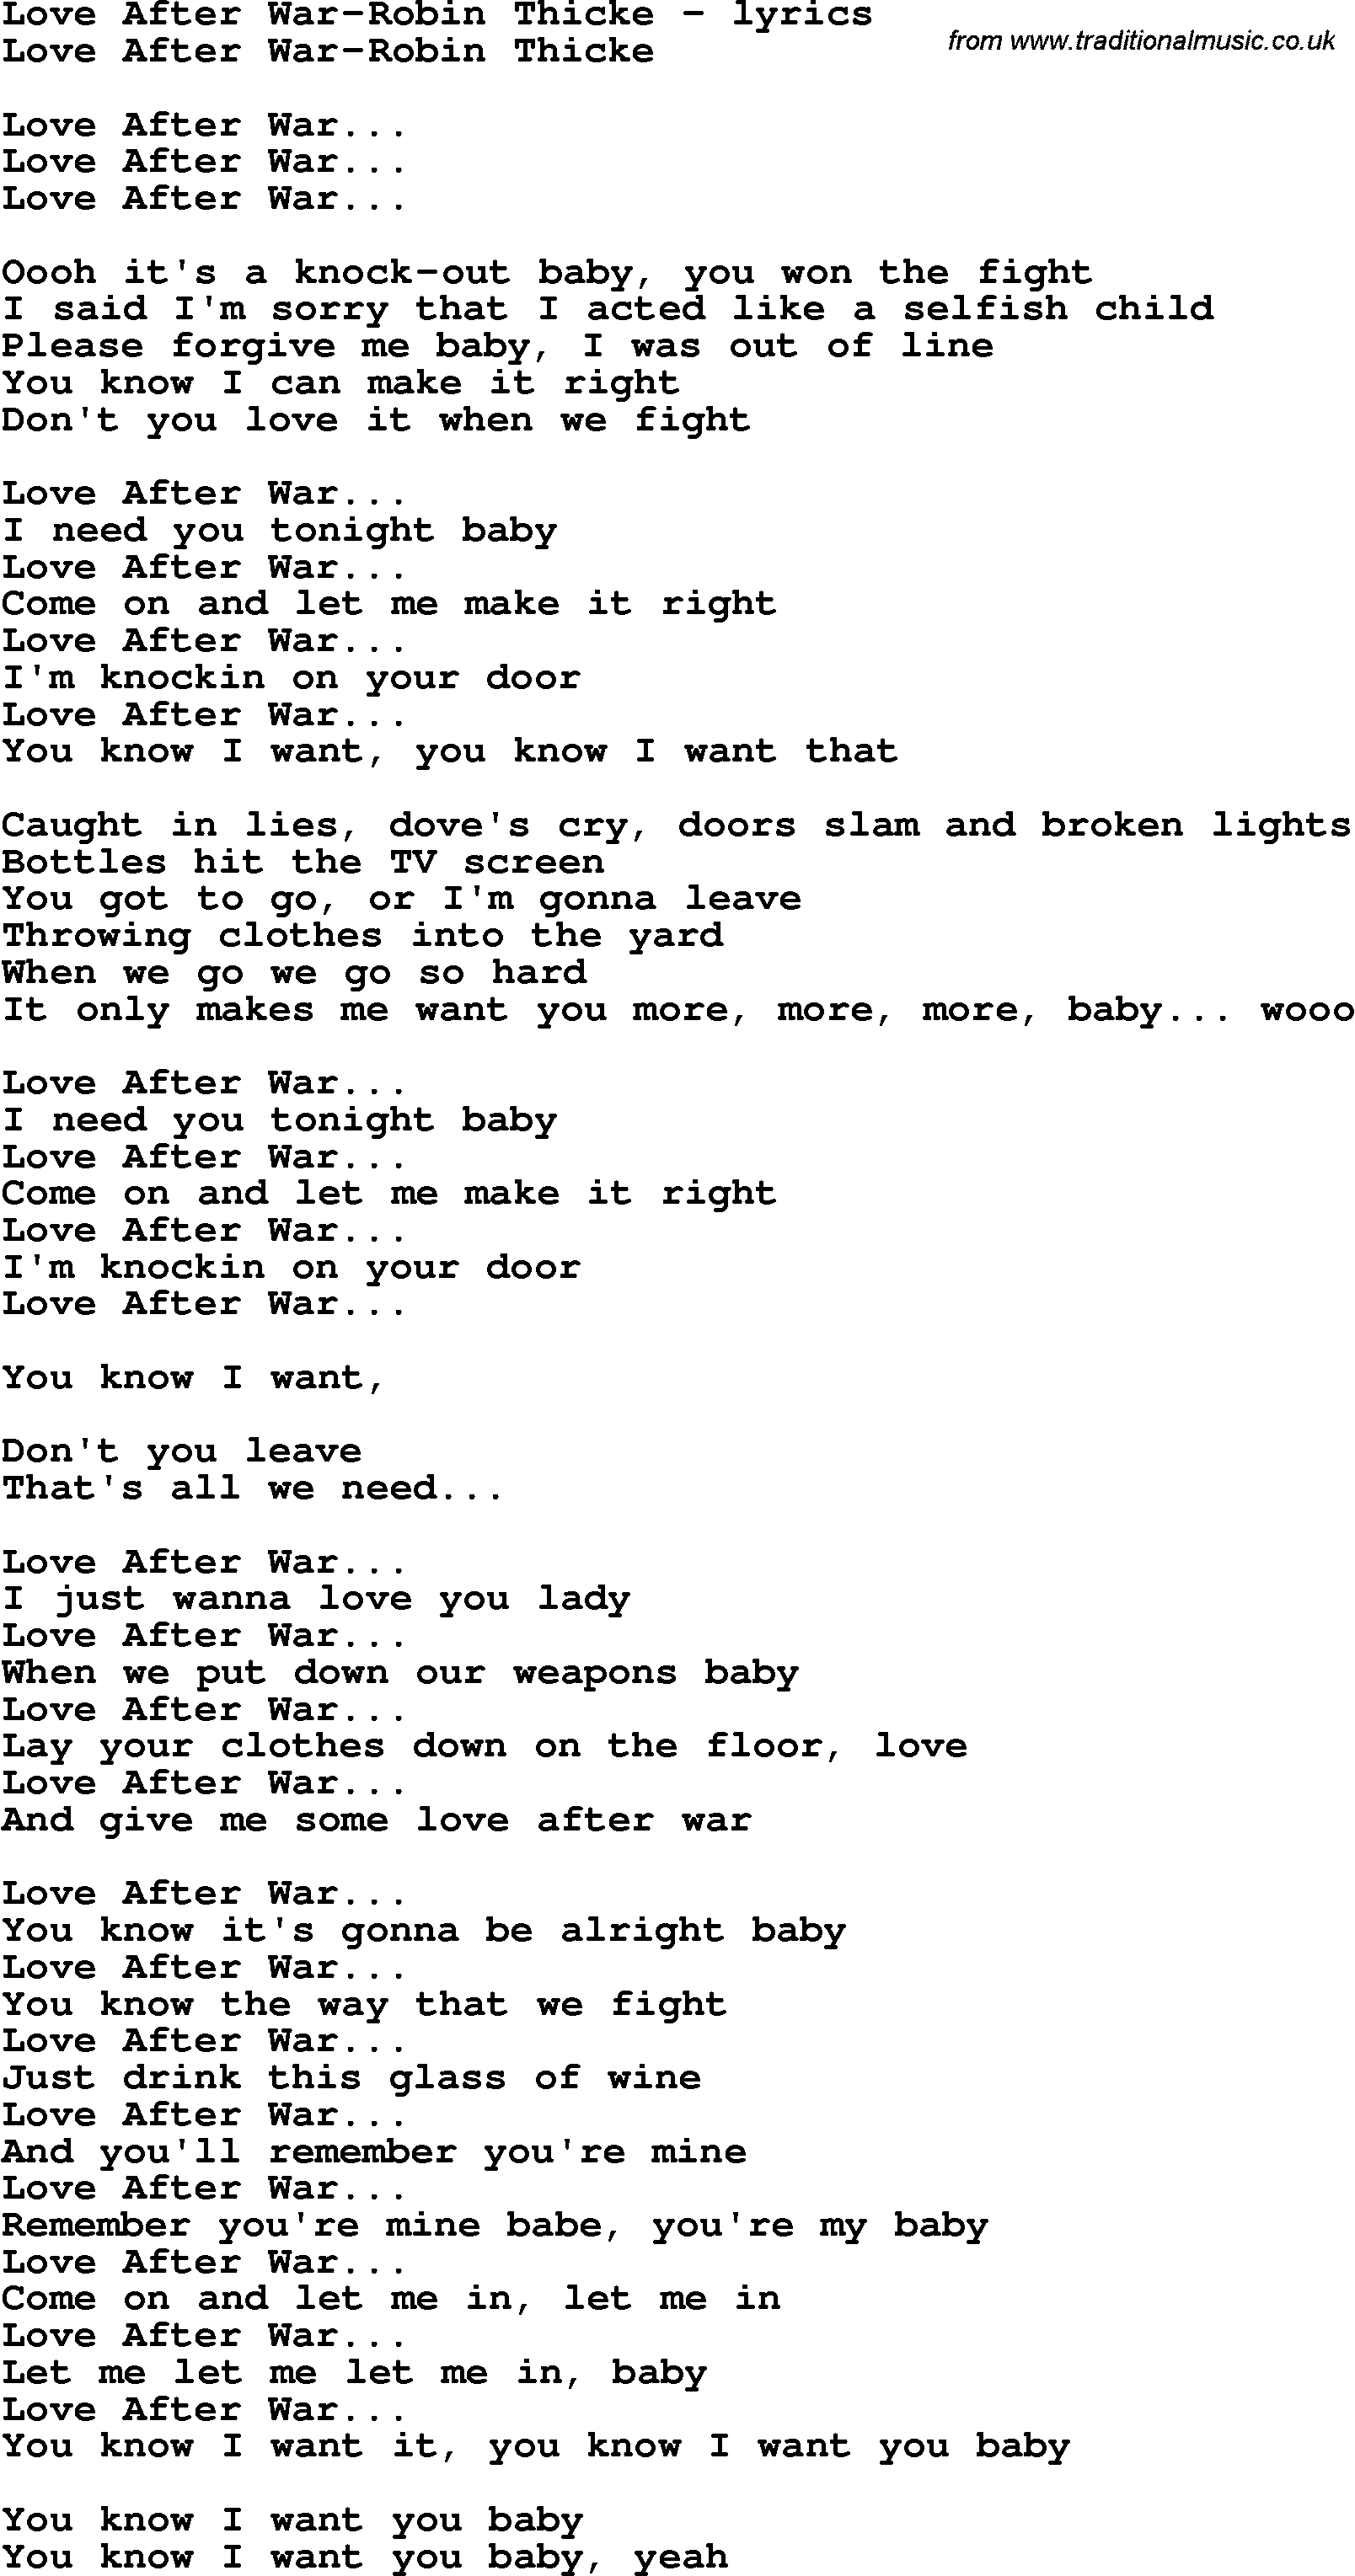 Love Song Lyrics for: Love After War-Robin Thicke